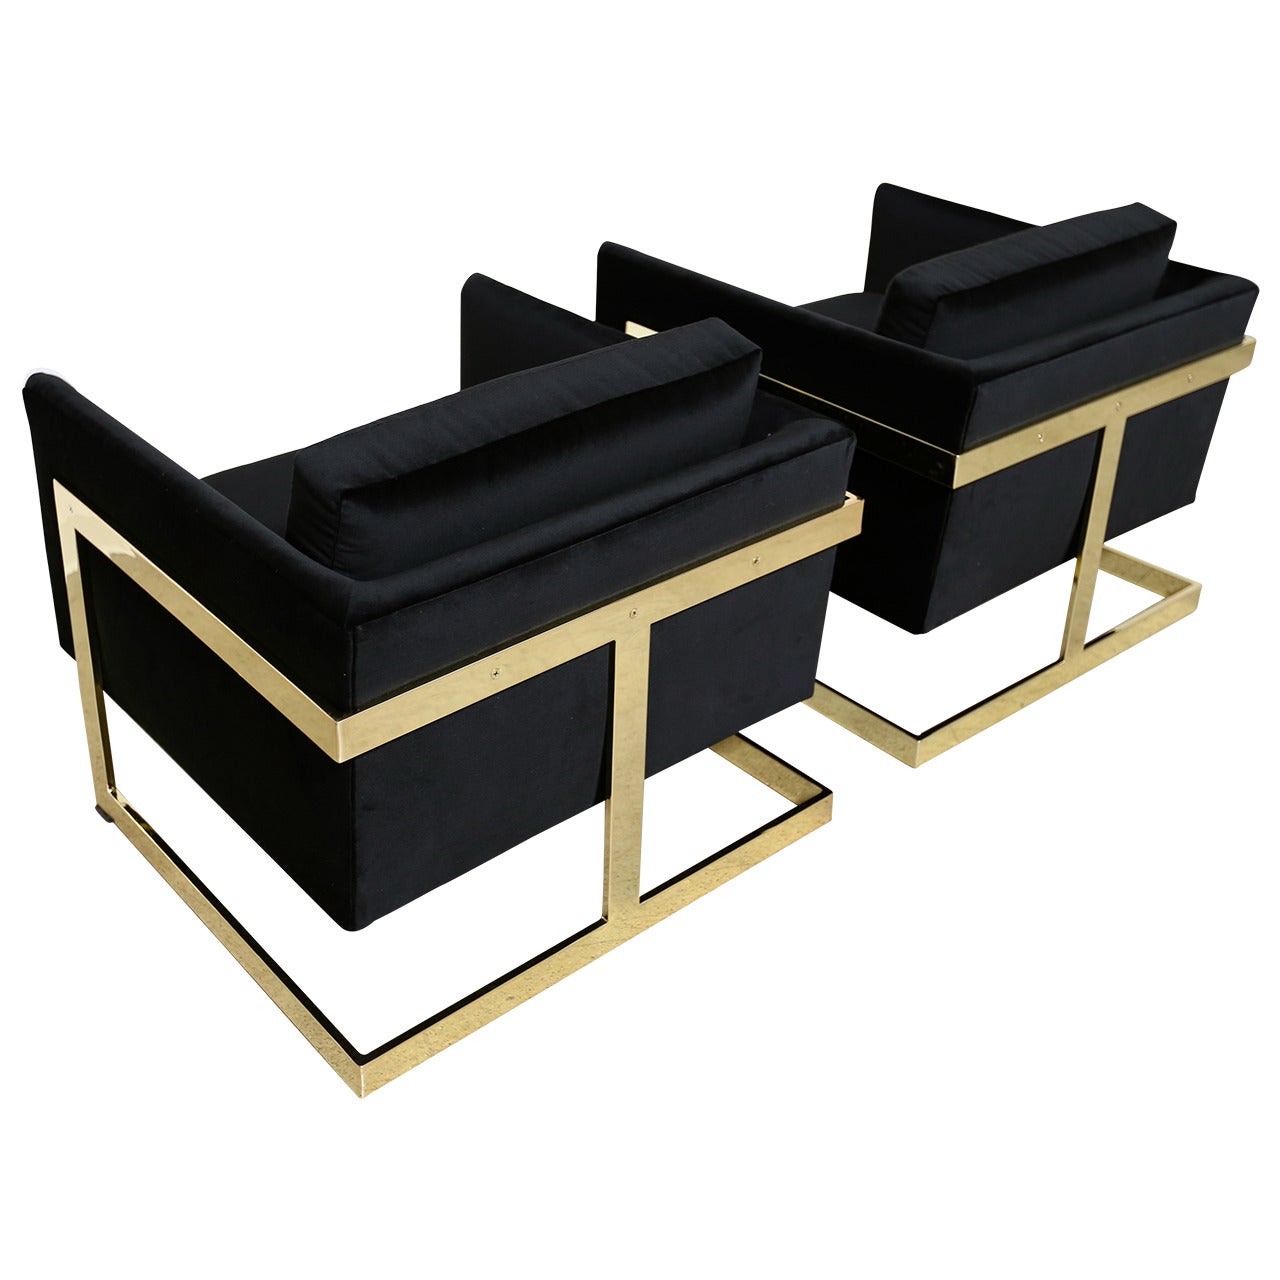 Mirror Polished Brass "Cube" Chairs by Milo Baughman